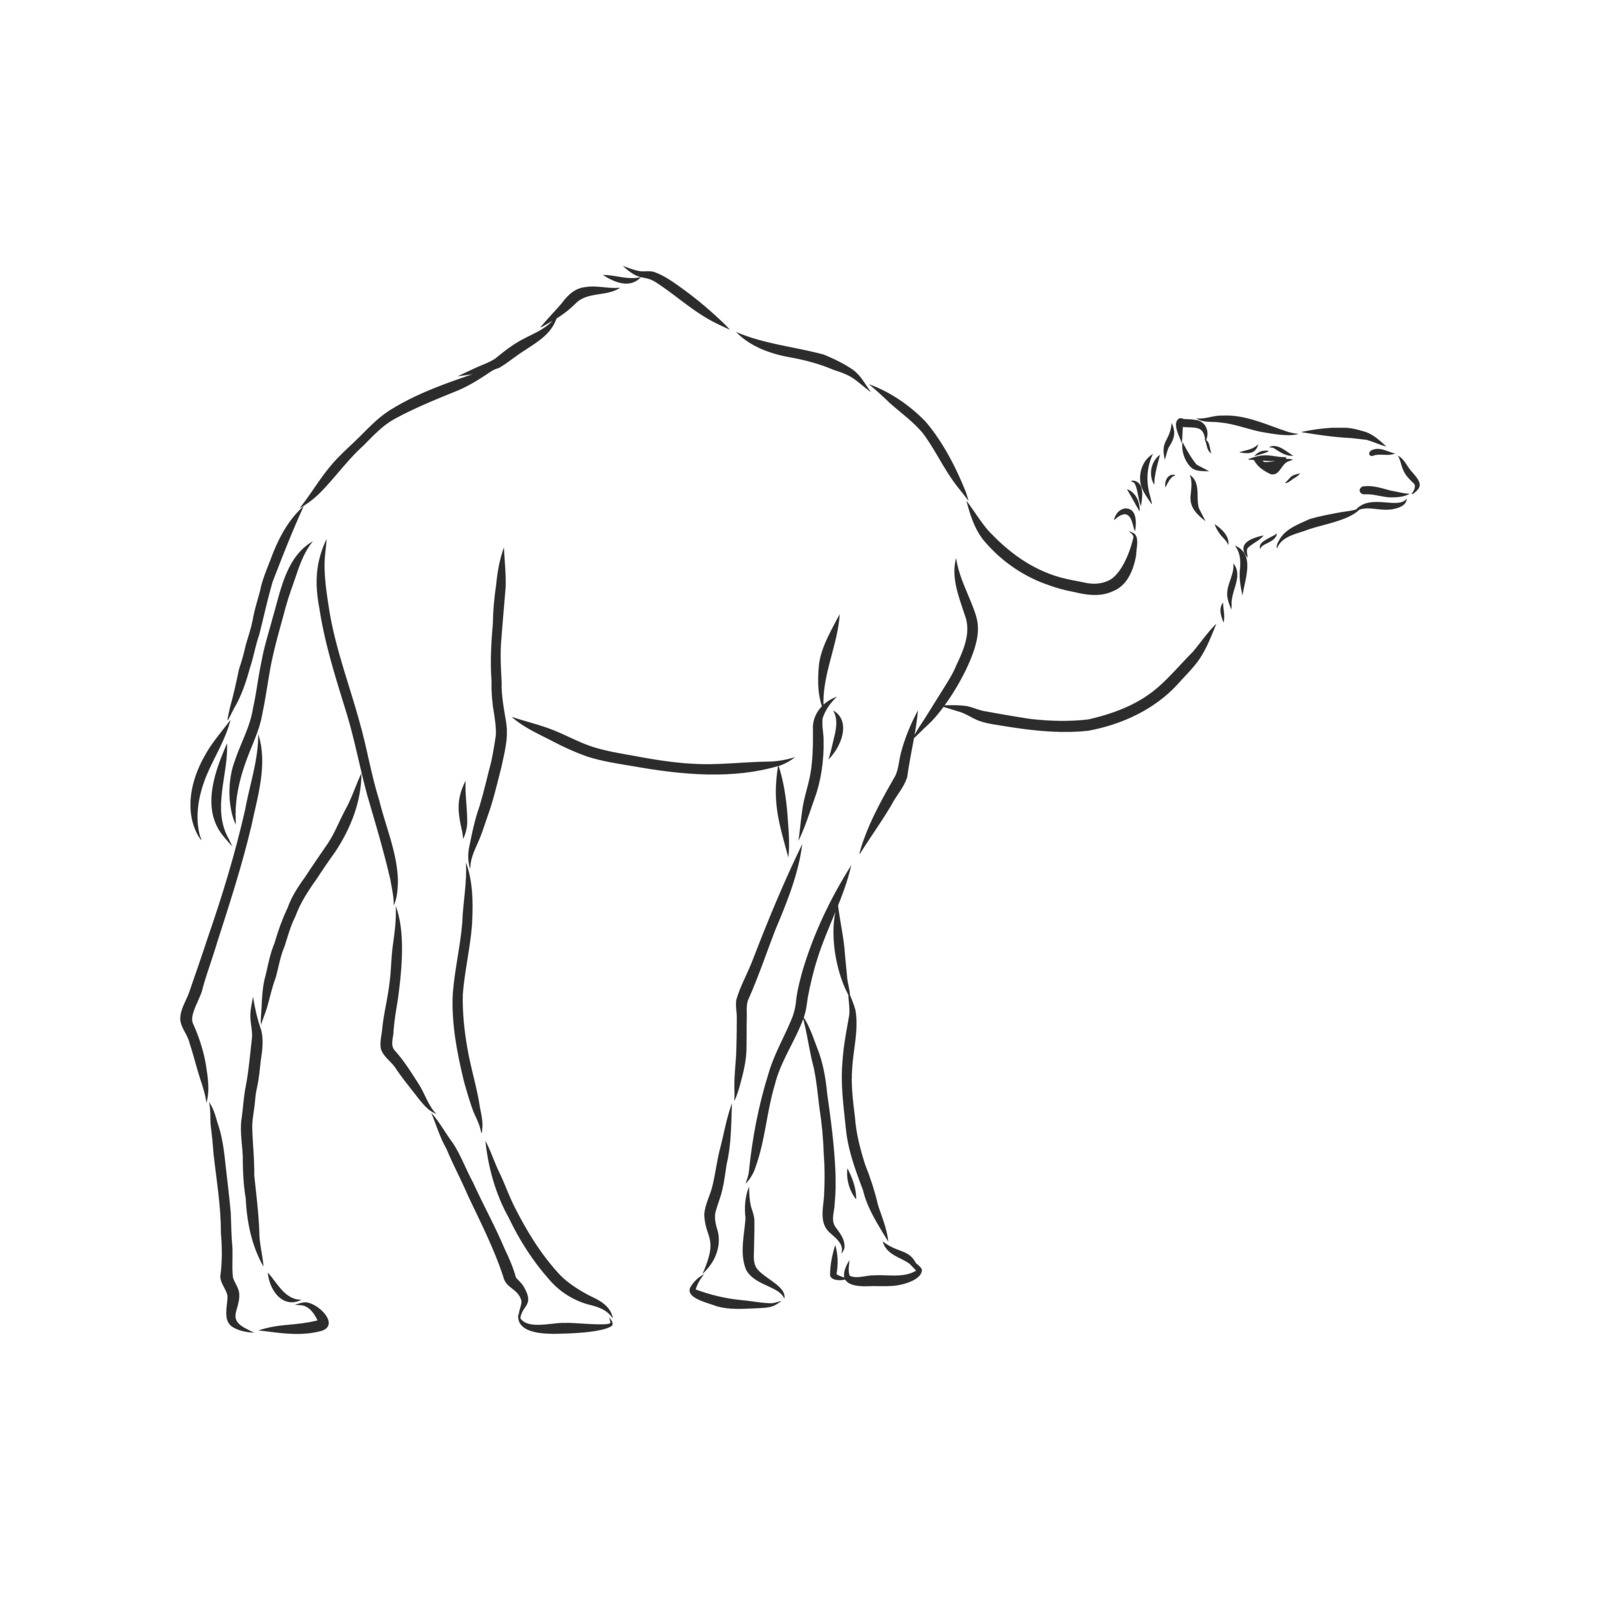 Camel. Hand drawn vector illustration. Can be used separately from your design.